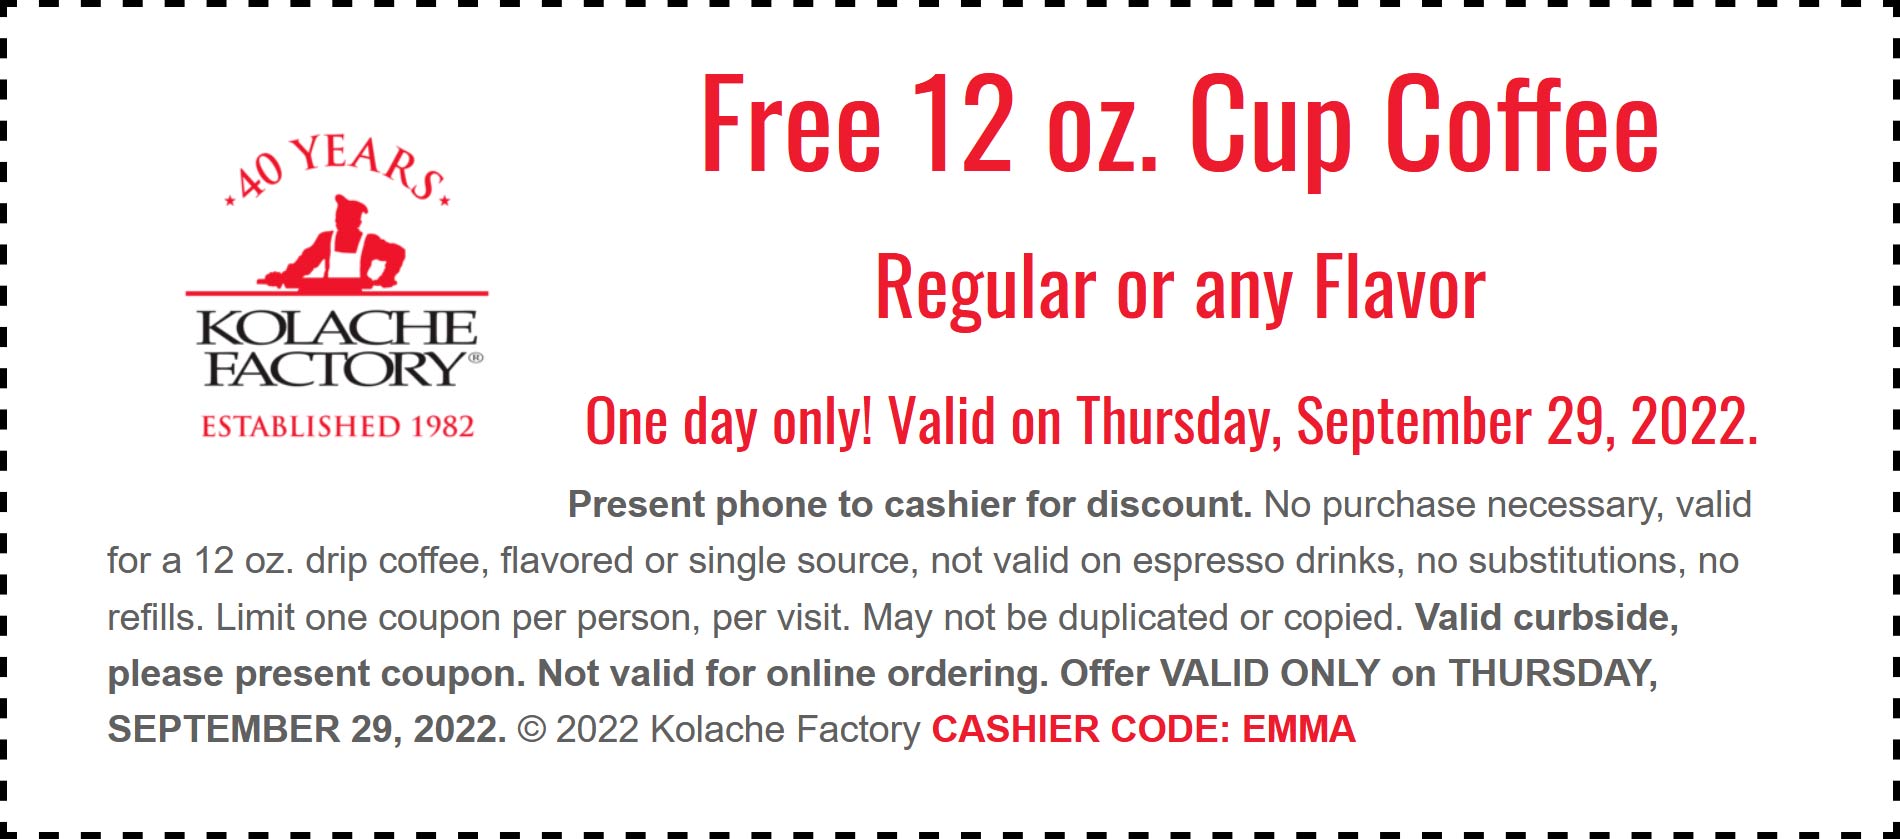 Kolache Factory coupons & promo code for [February 2023]